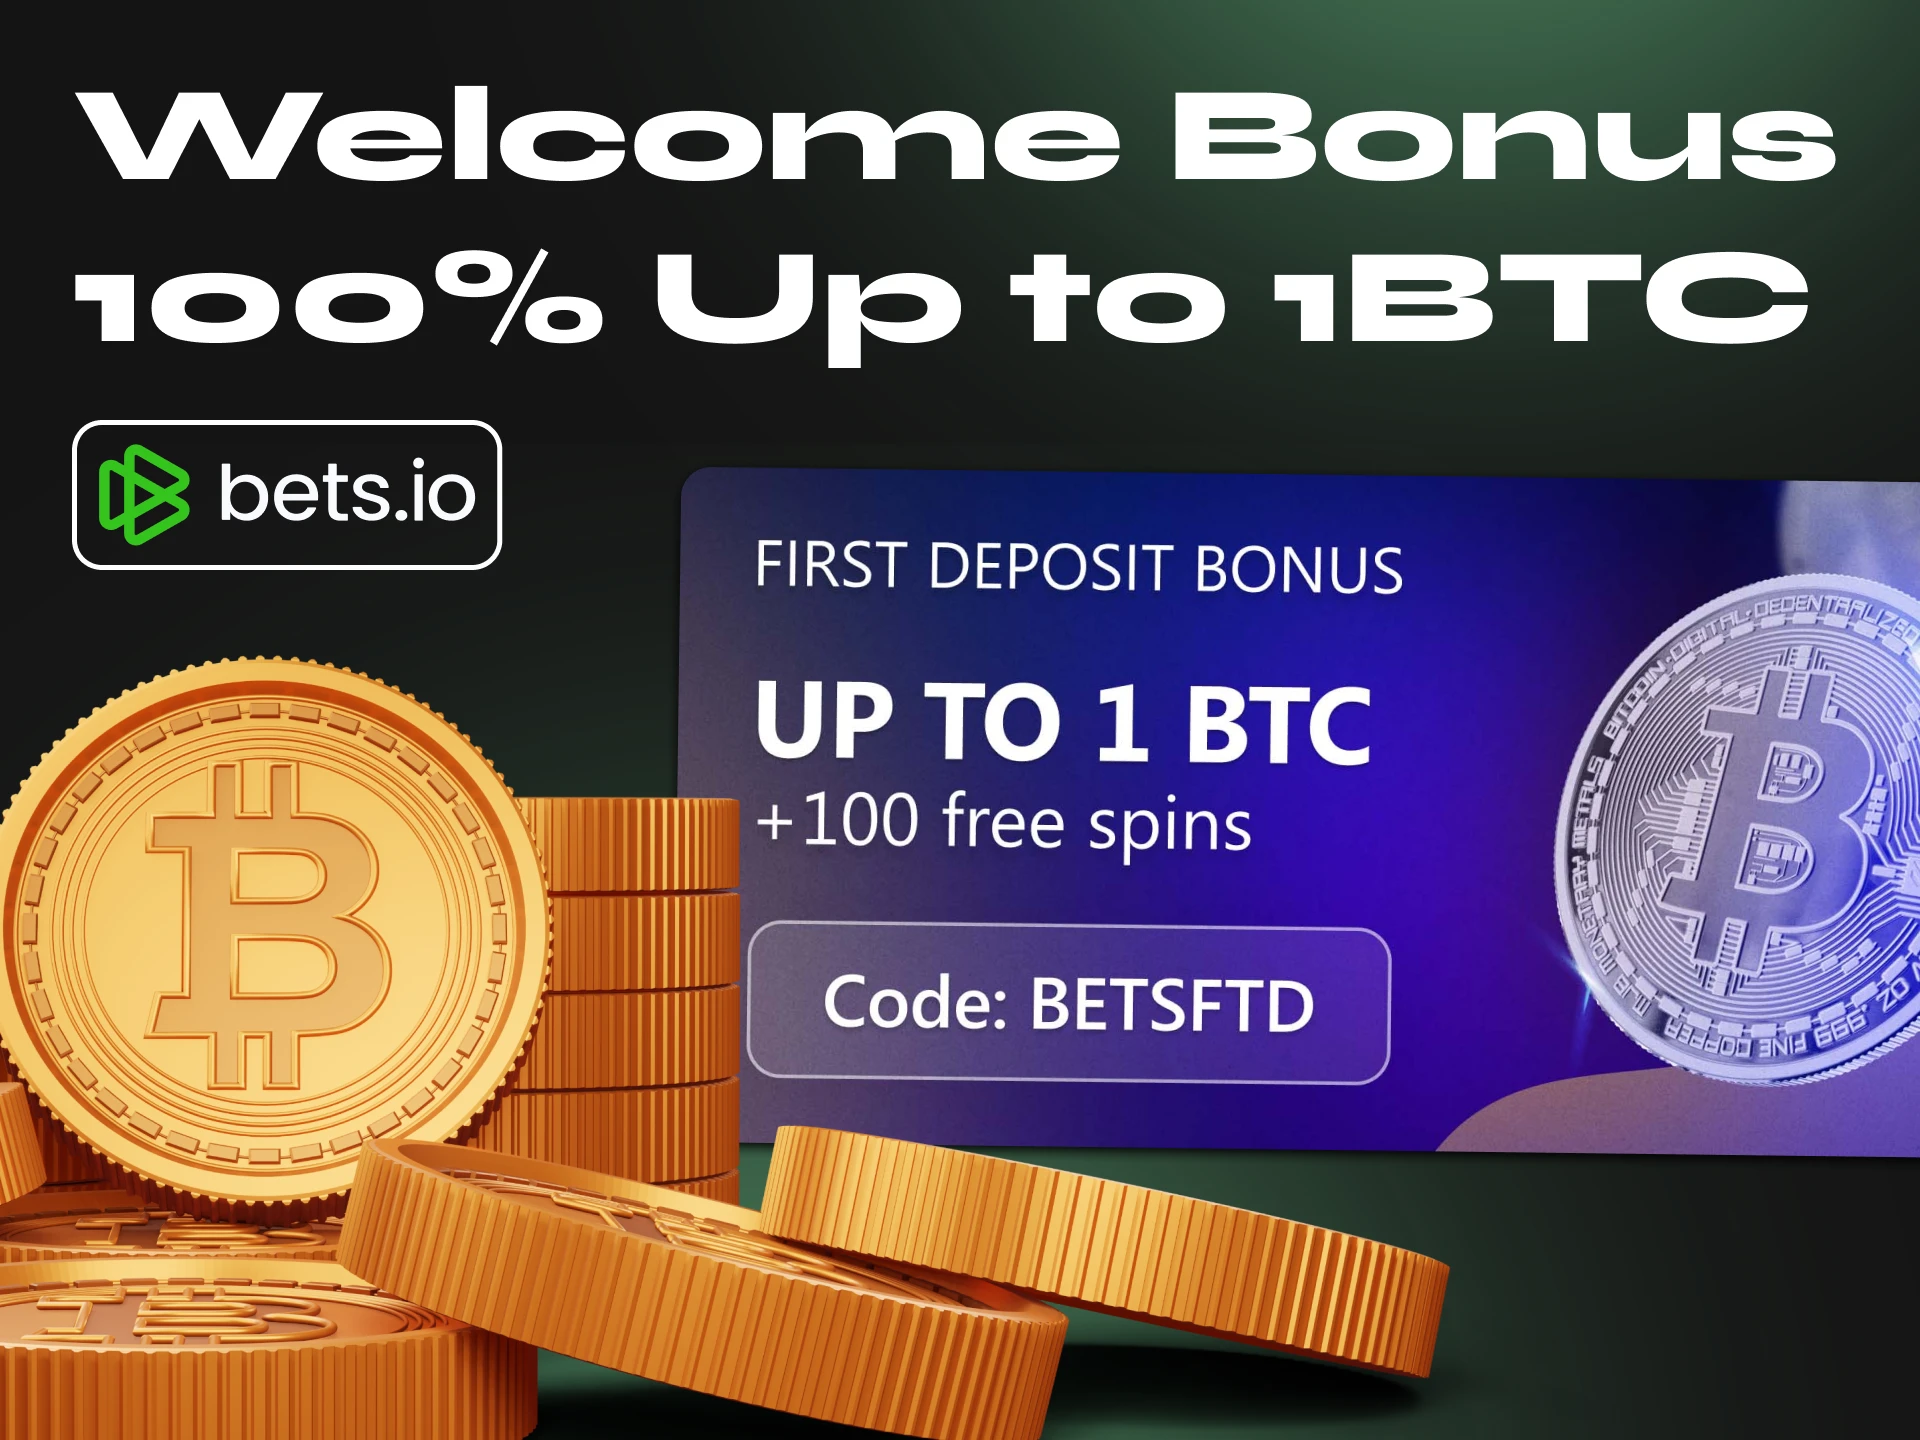 Bets io Casino offers a large casino section with poker games and a lucrative welcome bonus.